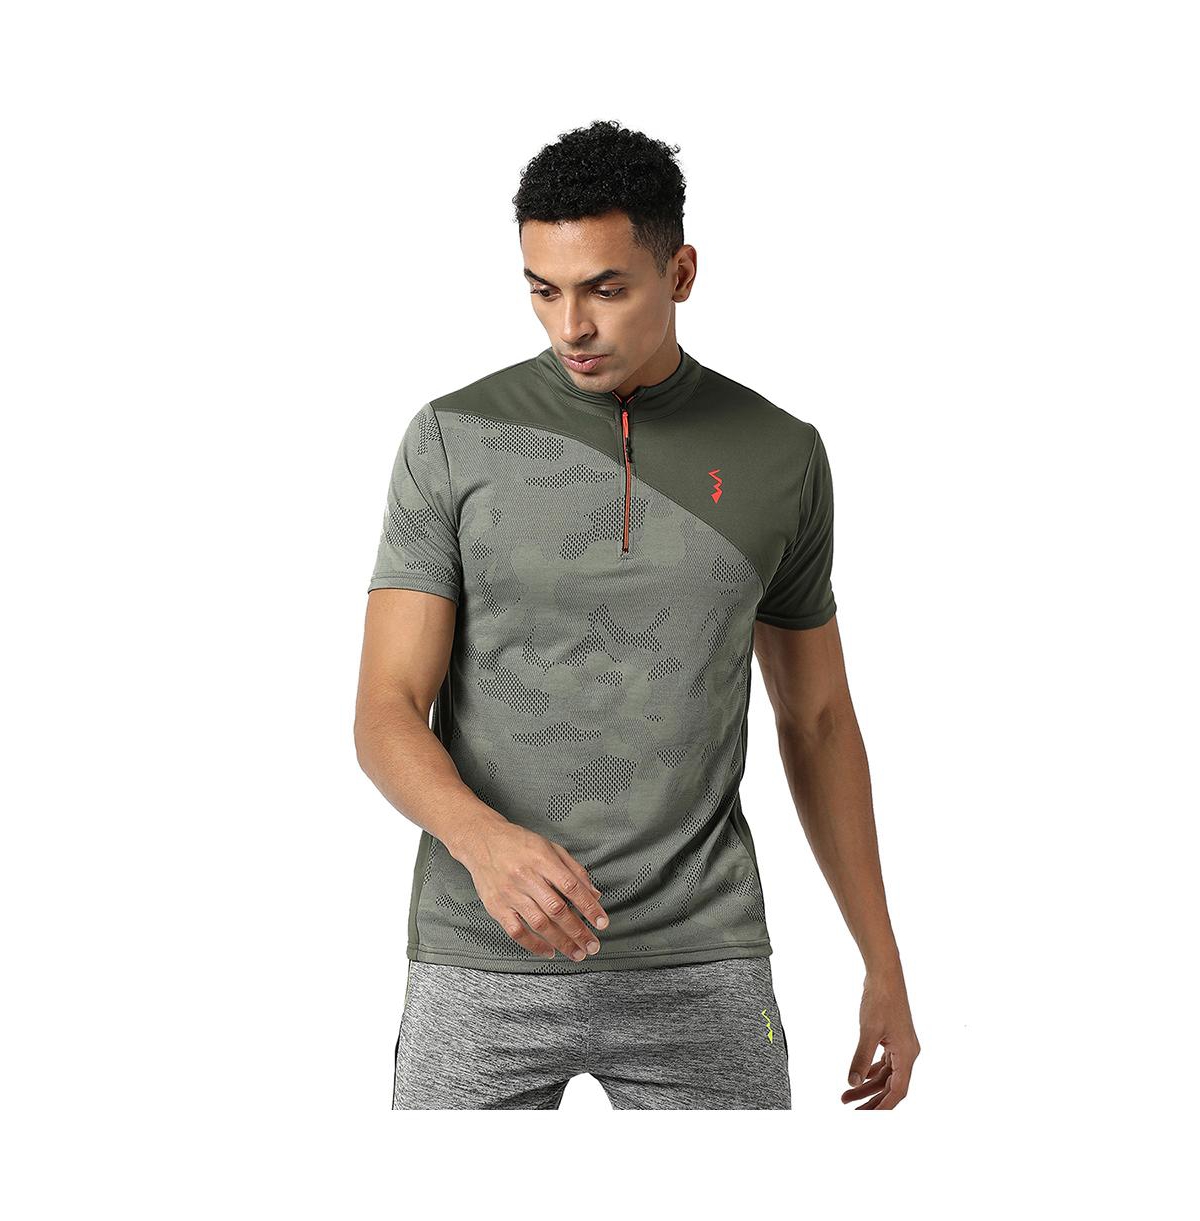 Men's Olive Green Camouflage Active wear T-Shirt - Olive green